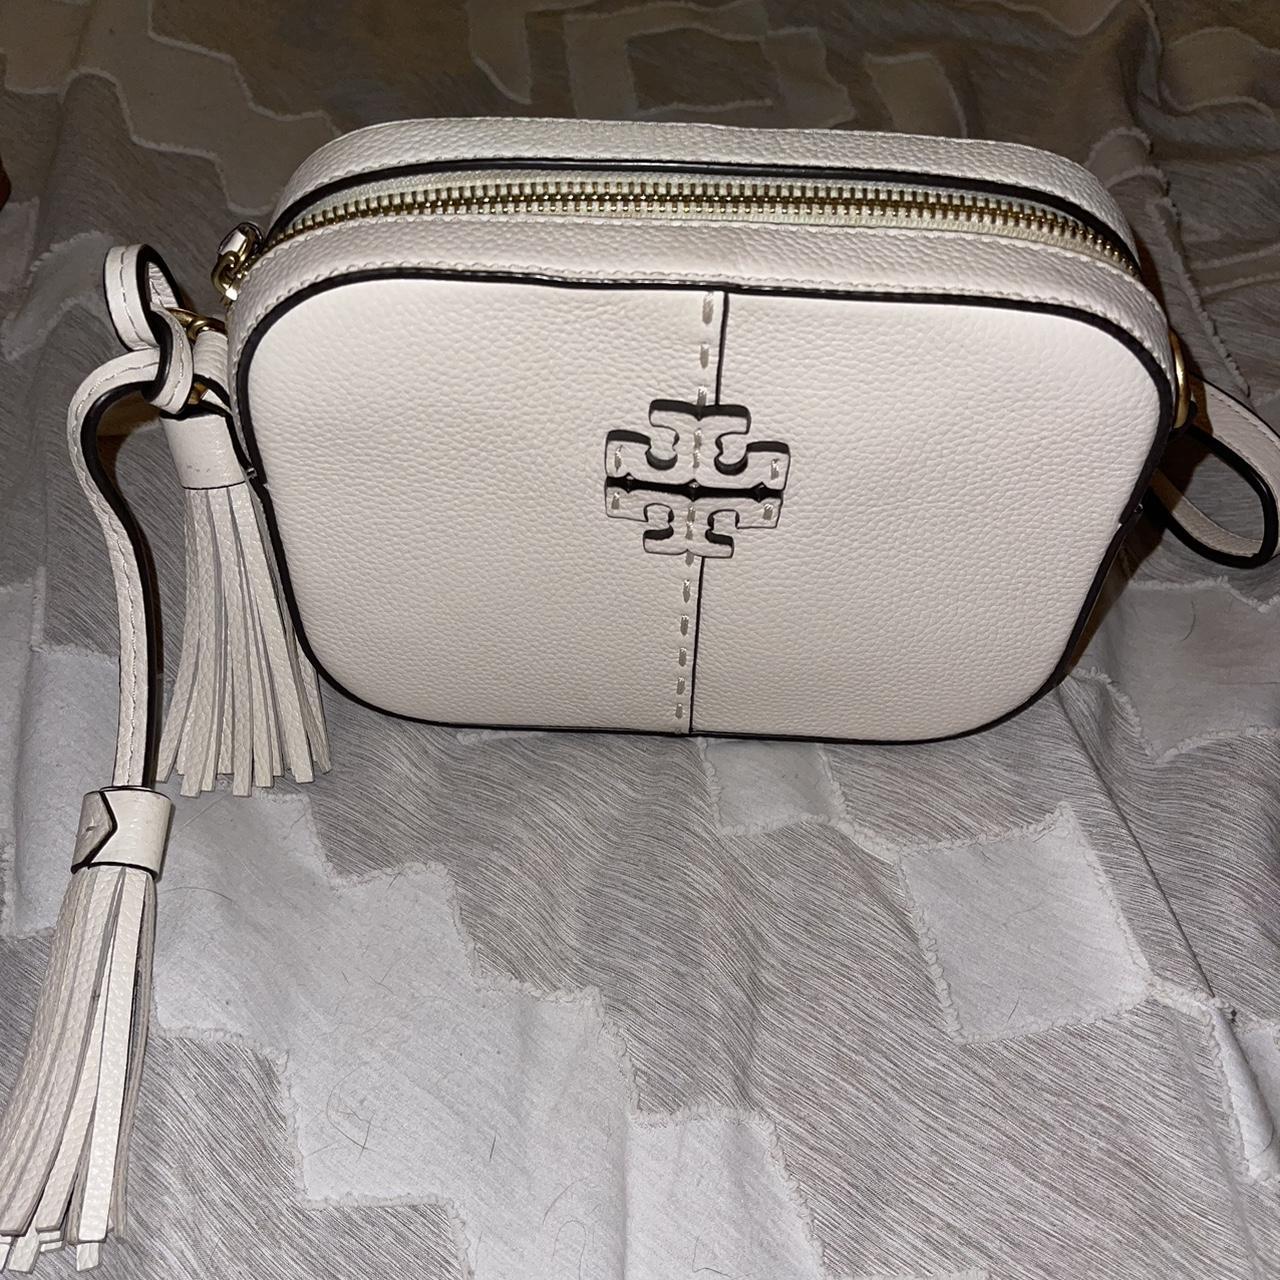 Tory Burch Women's White and Gold Bag | Depop